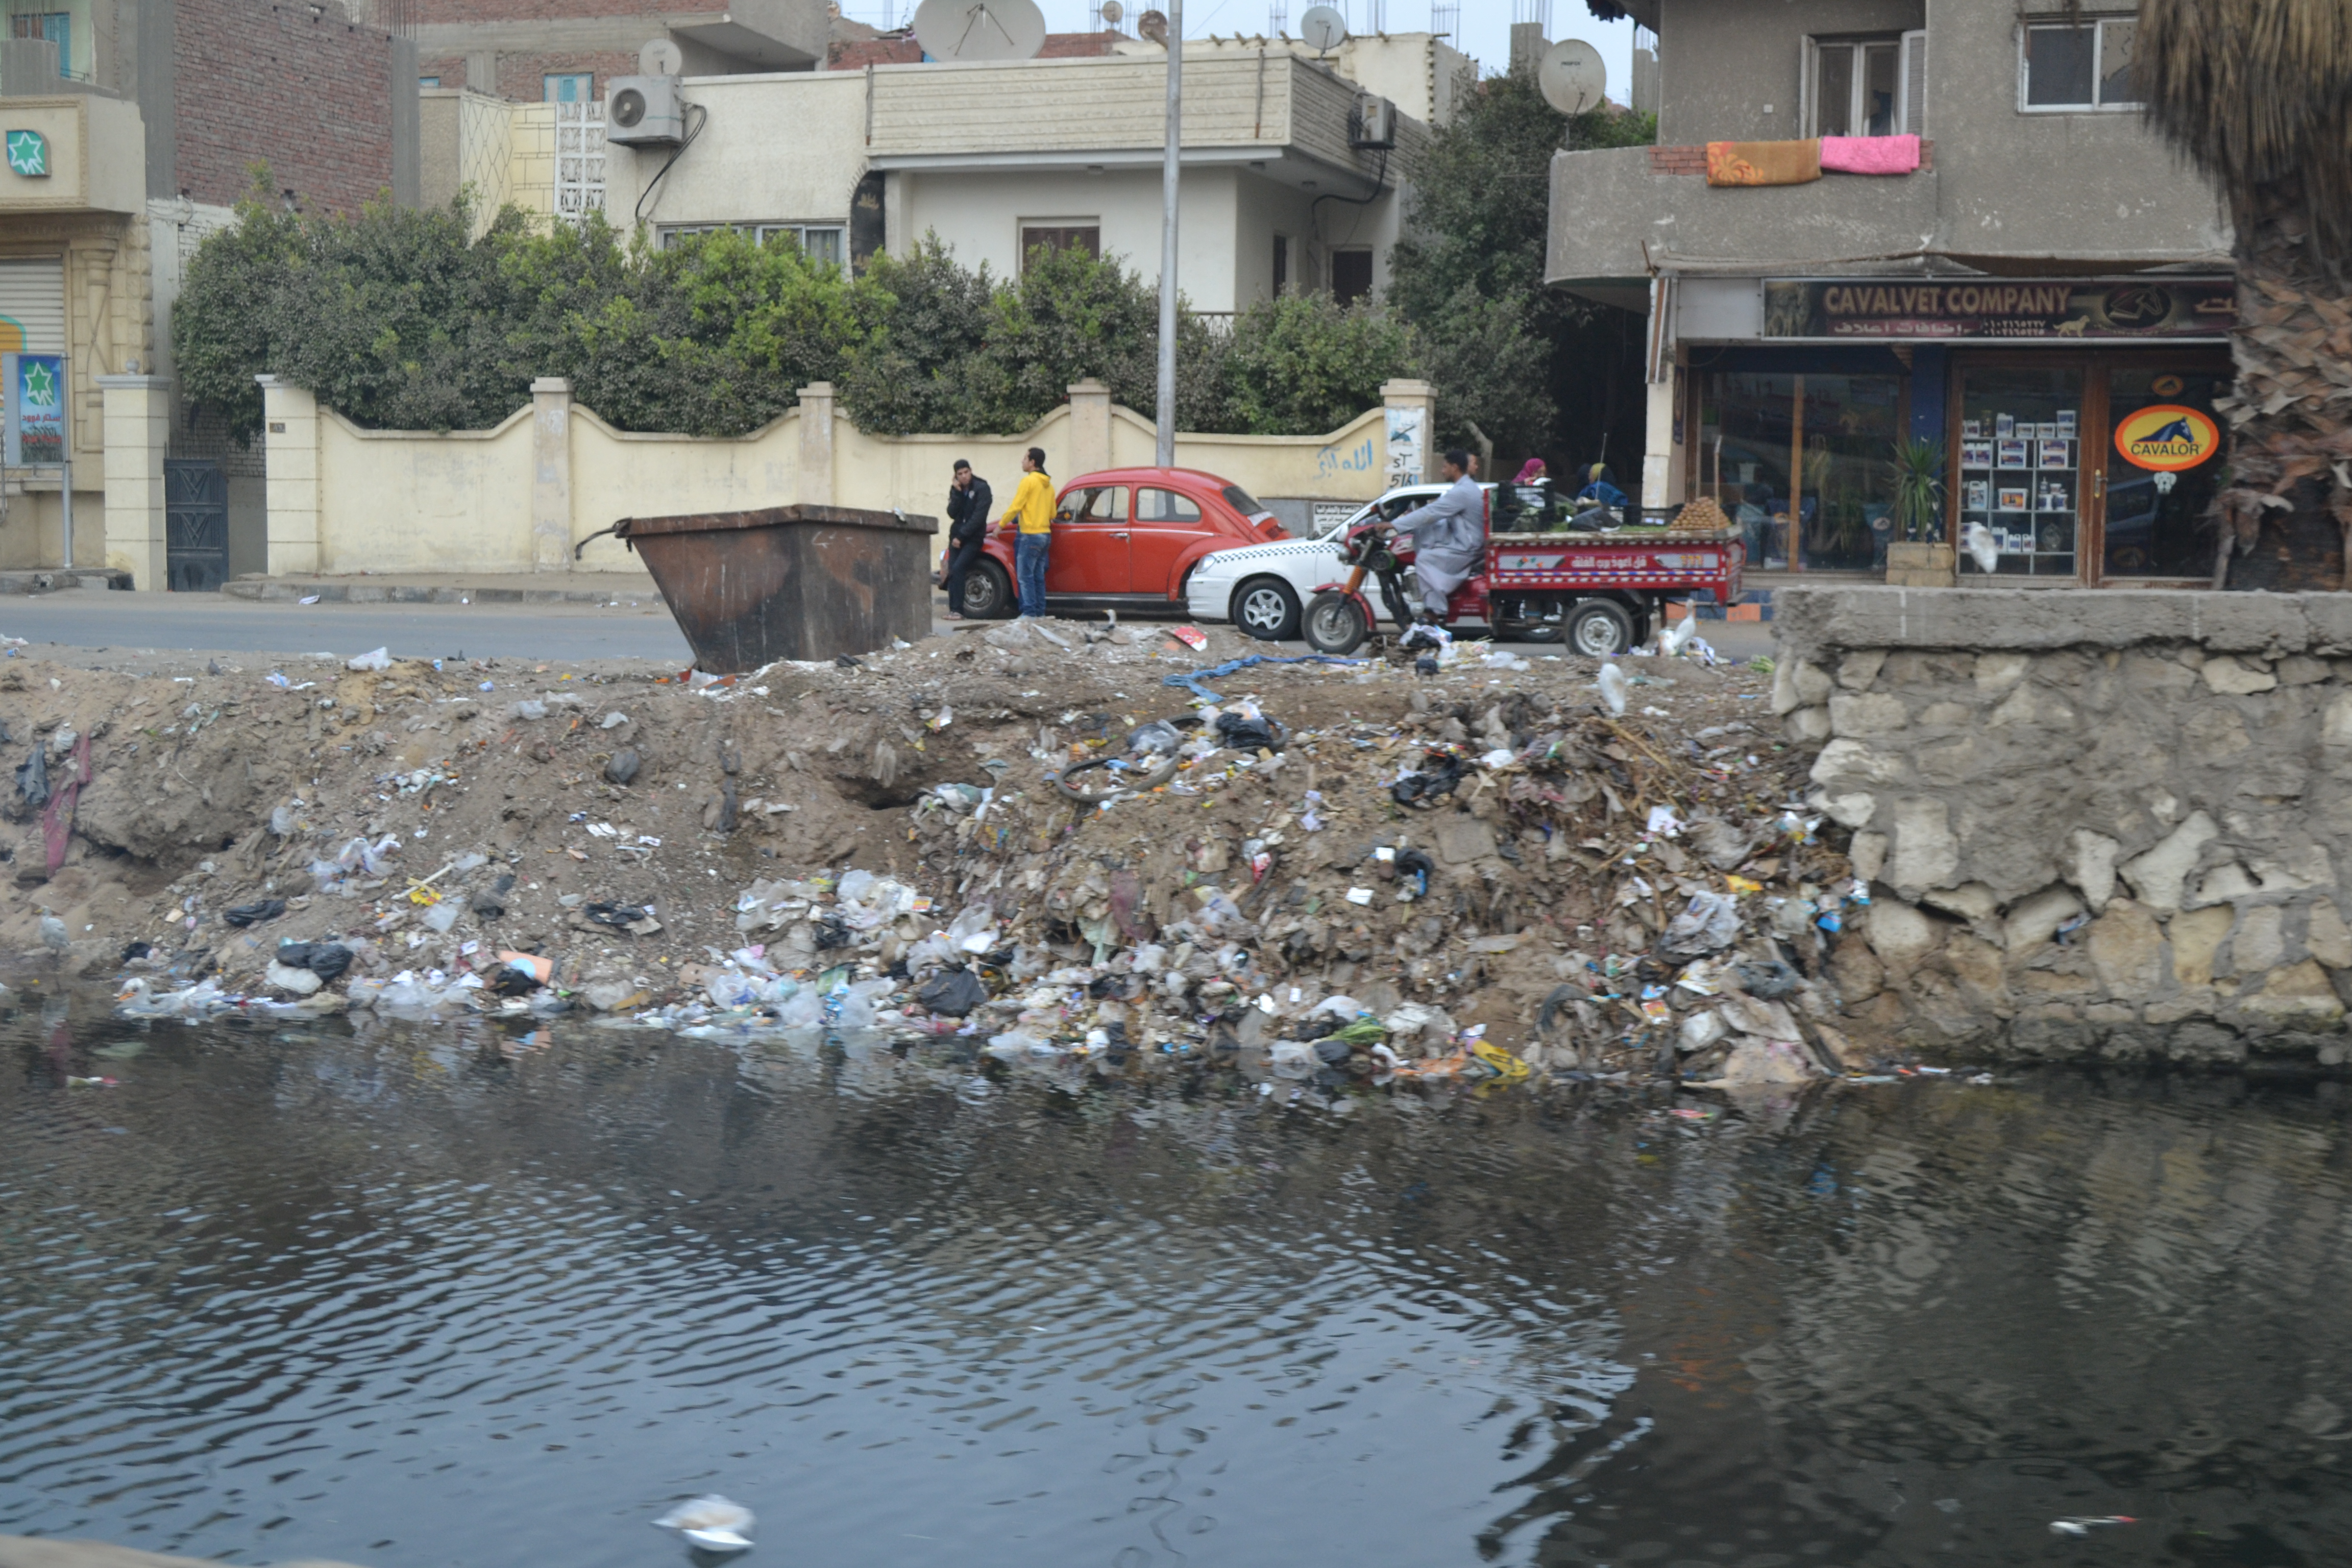 The dumping of garbage in the Nile. This is one of the more 'modest' photos - others (un-captured) are atrocious.